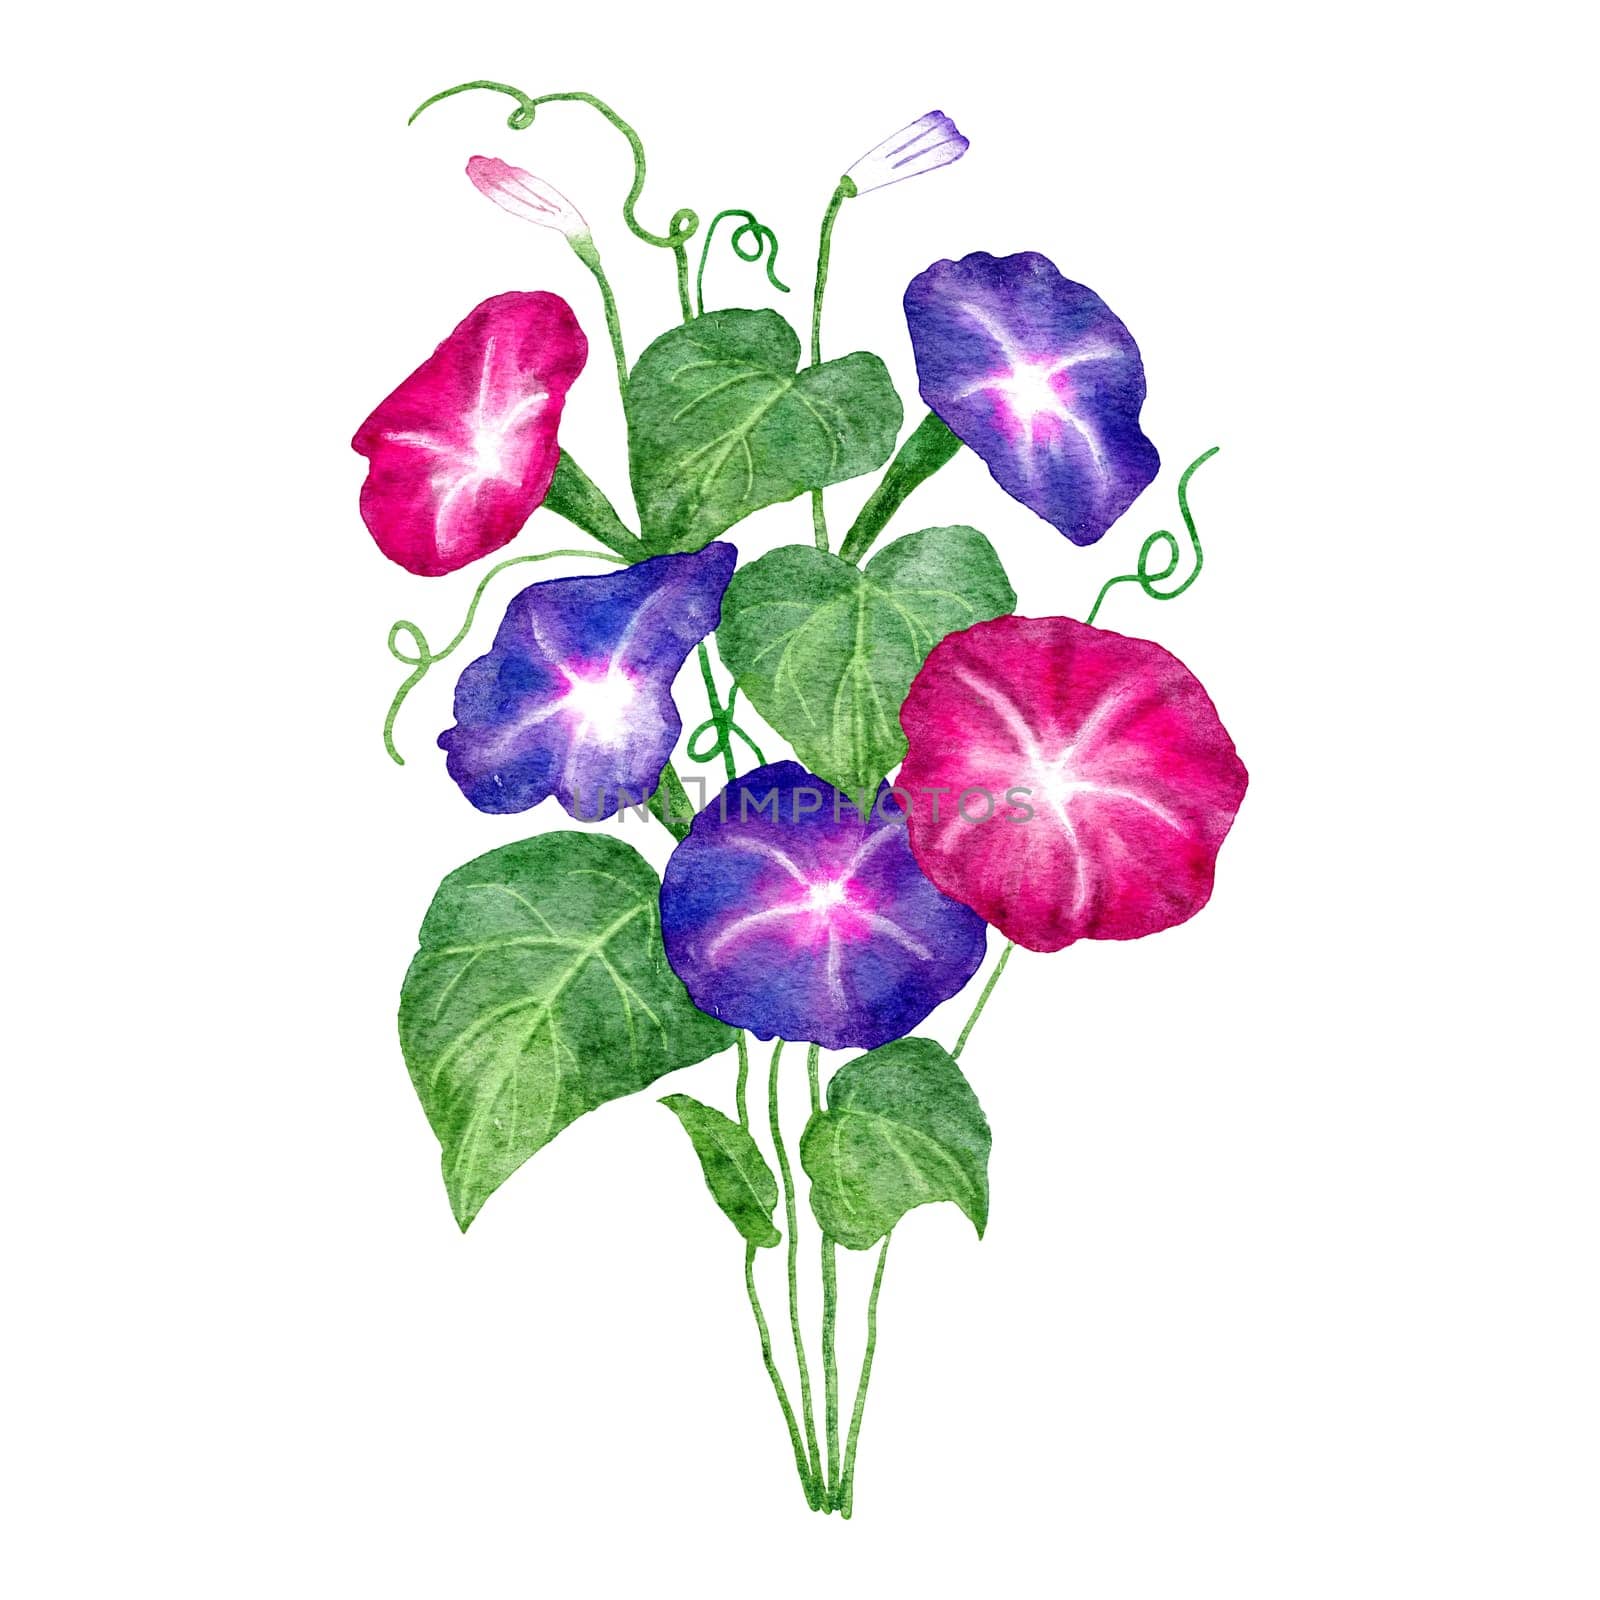 Hand drawn watercolor illustration of morning glory flower, Ipomoea floral in pink purple, green leaves. Garden bloom blossom botanical nature design, japanese style plant, ivy drawing gardening. by Lagmar